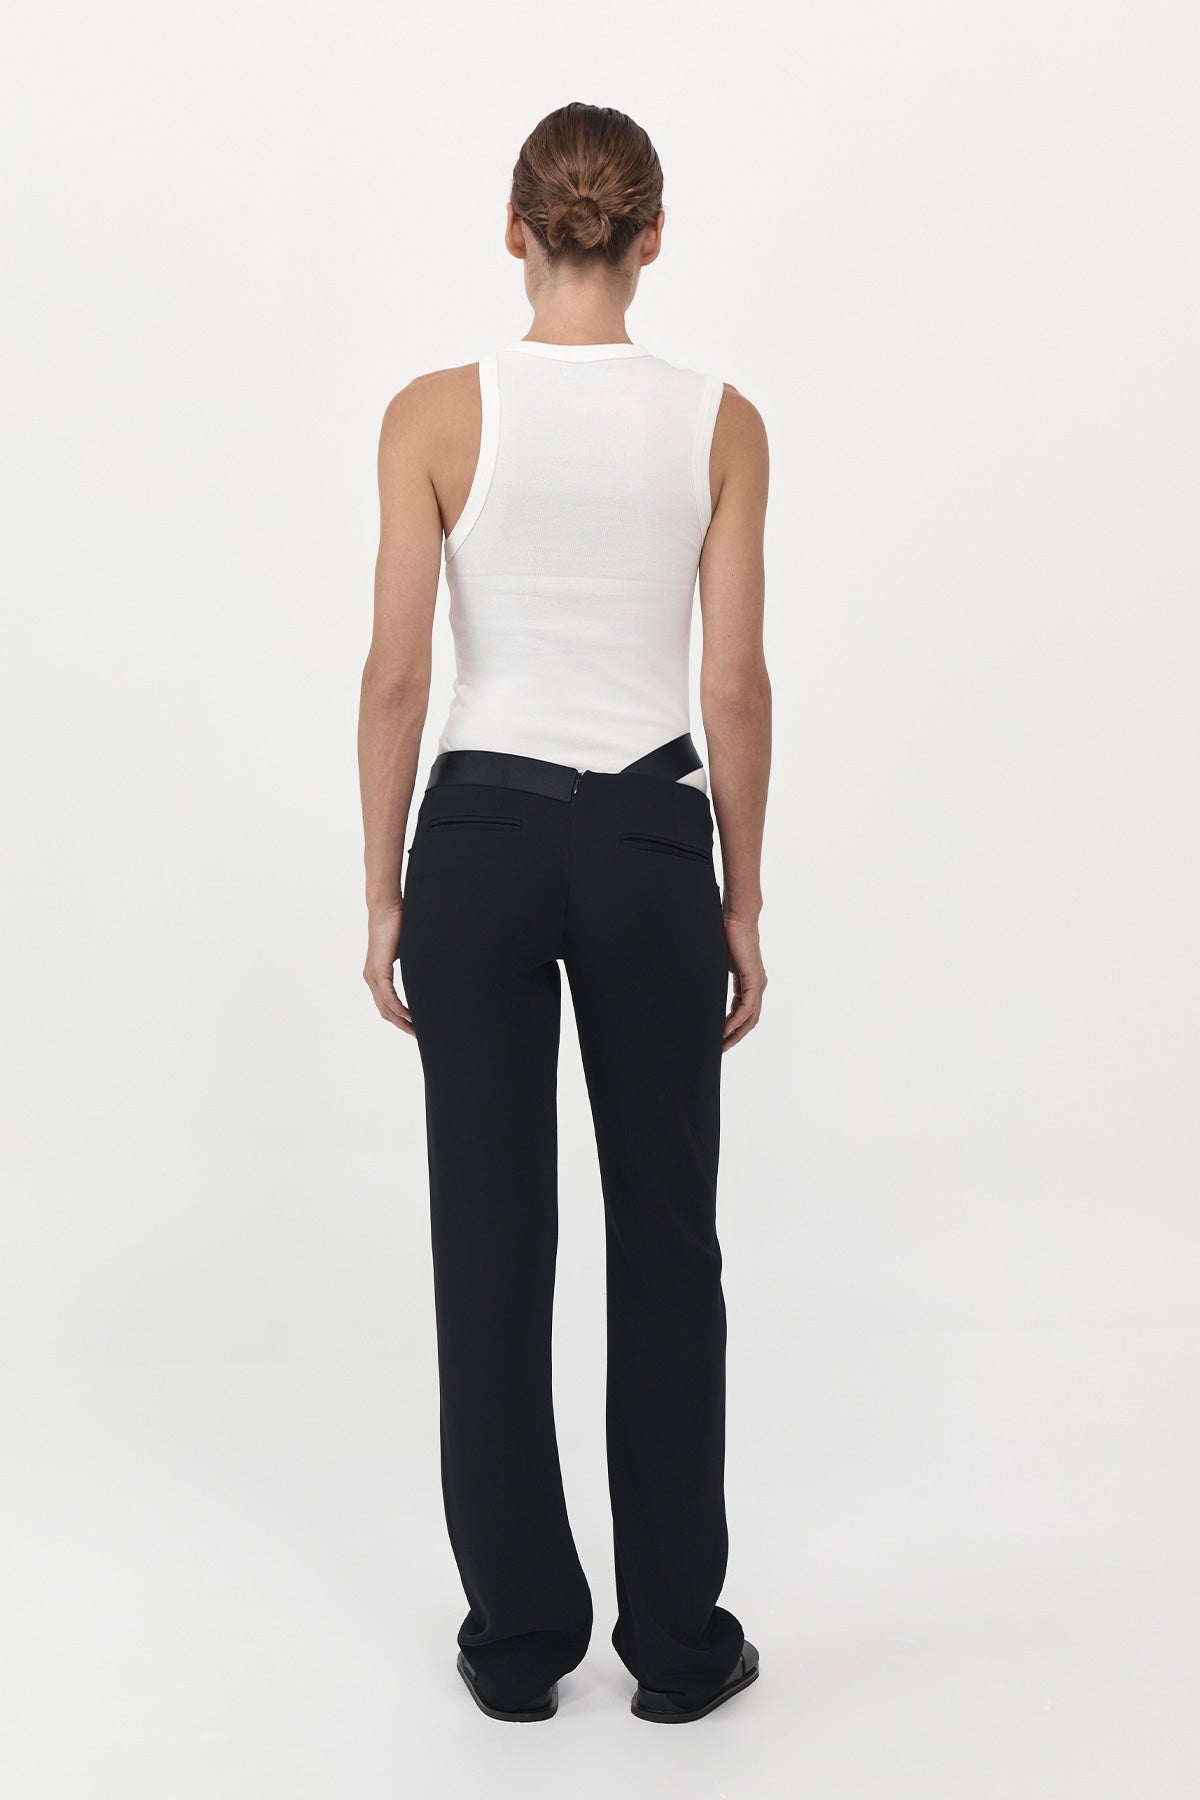 Deconstructed Trousers - Black